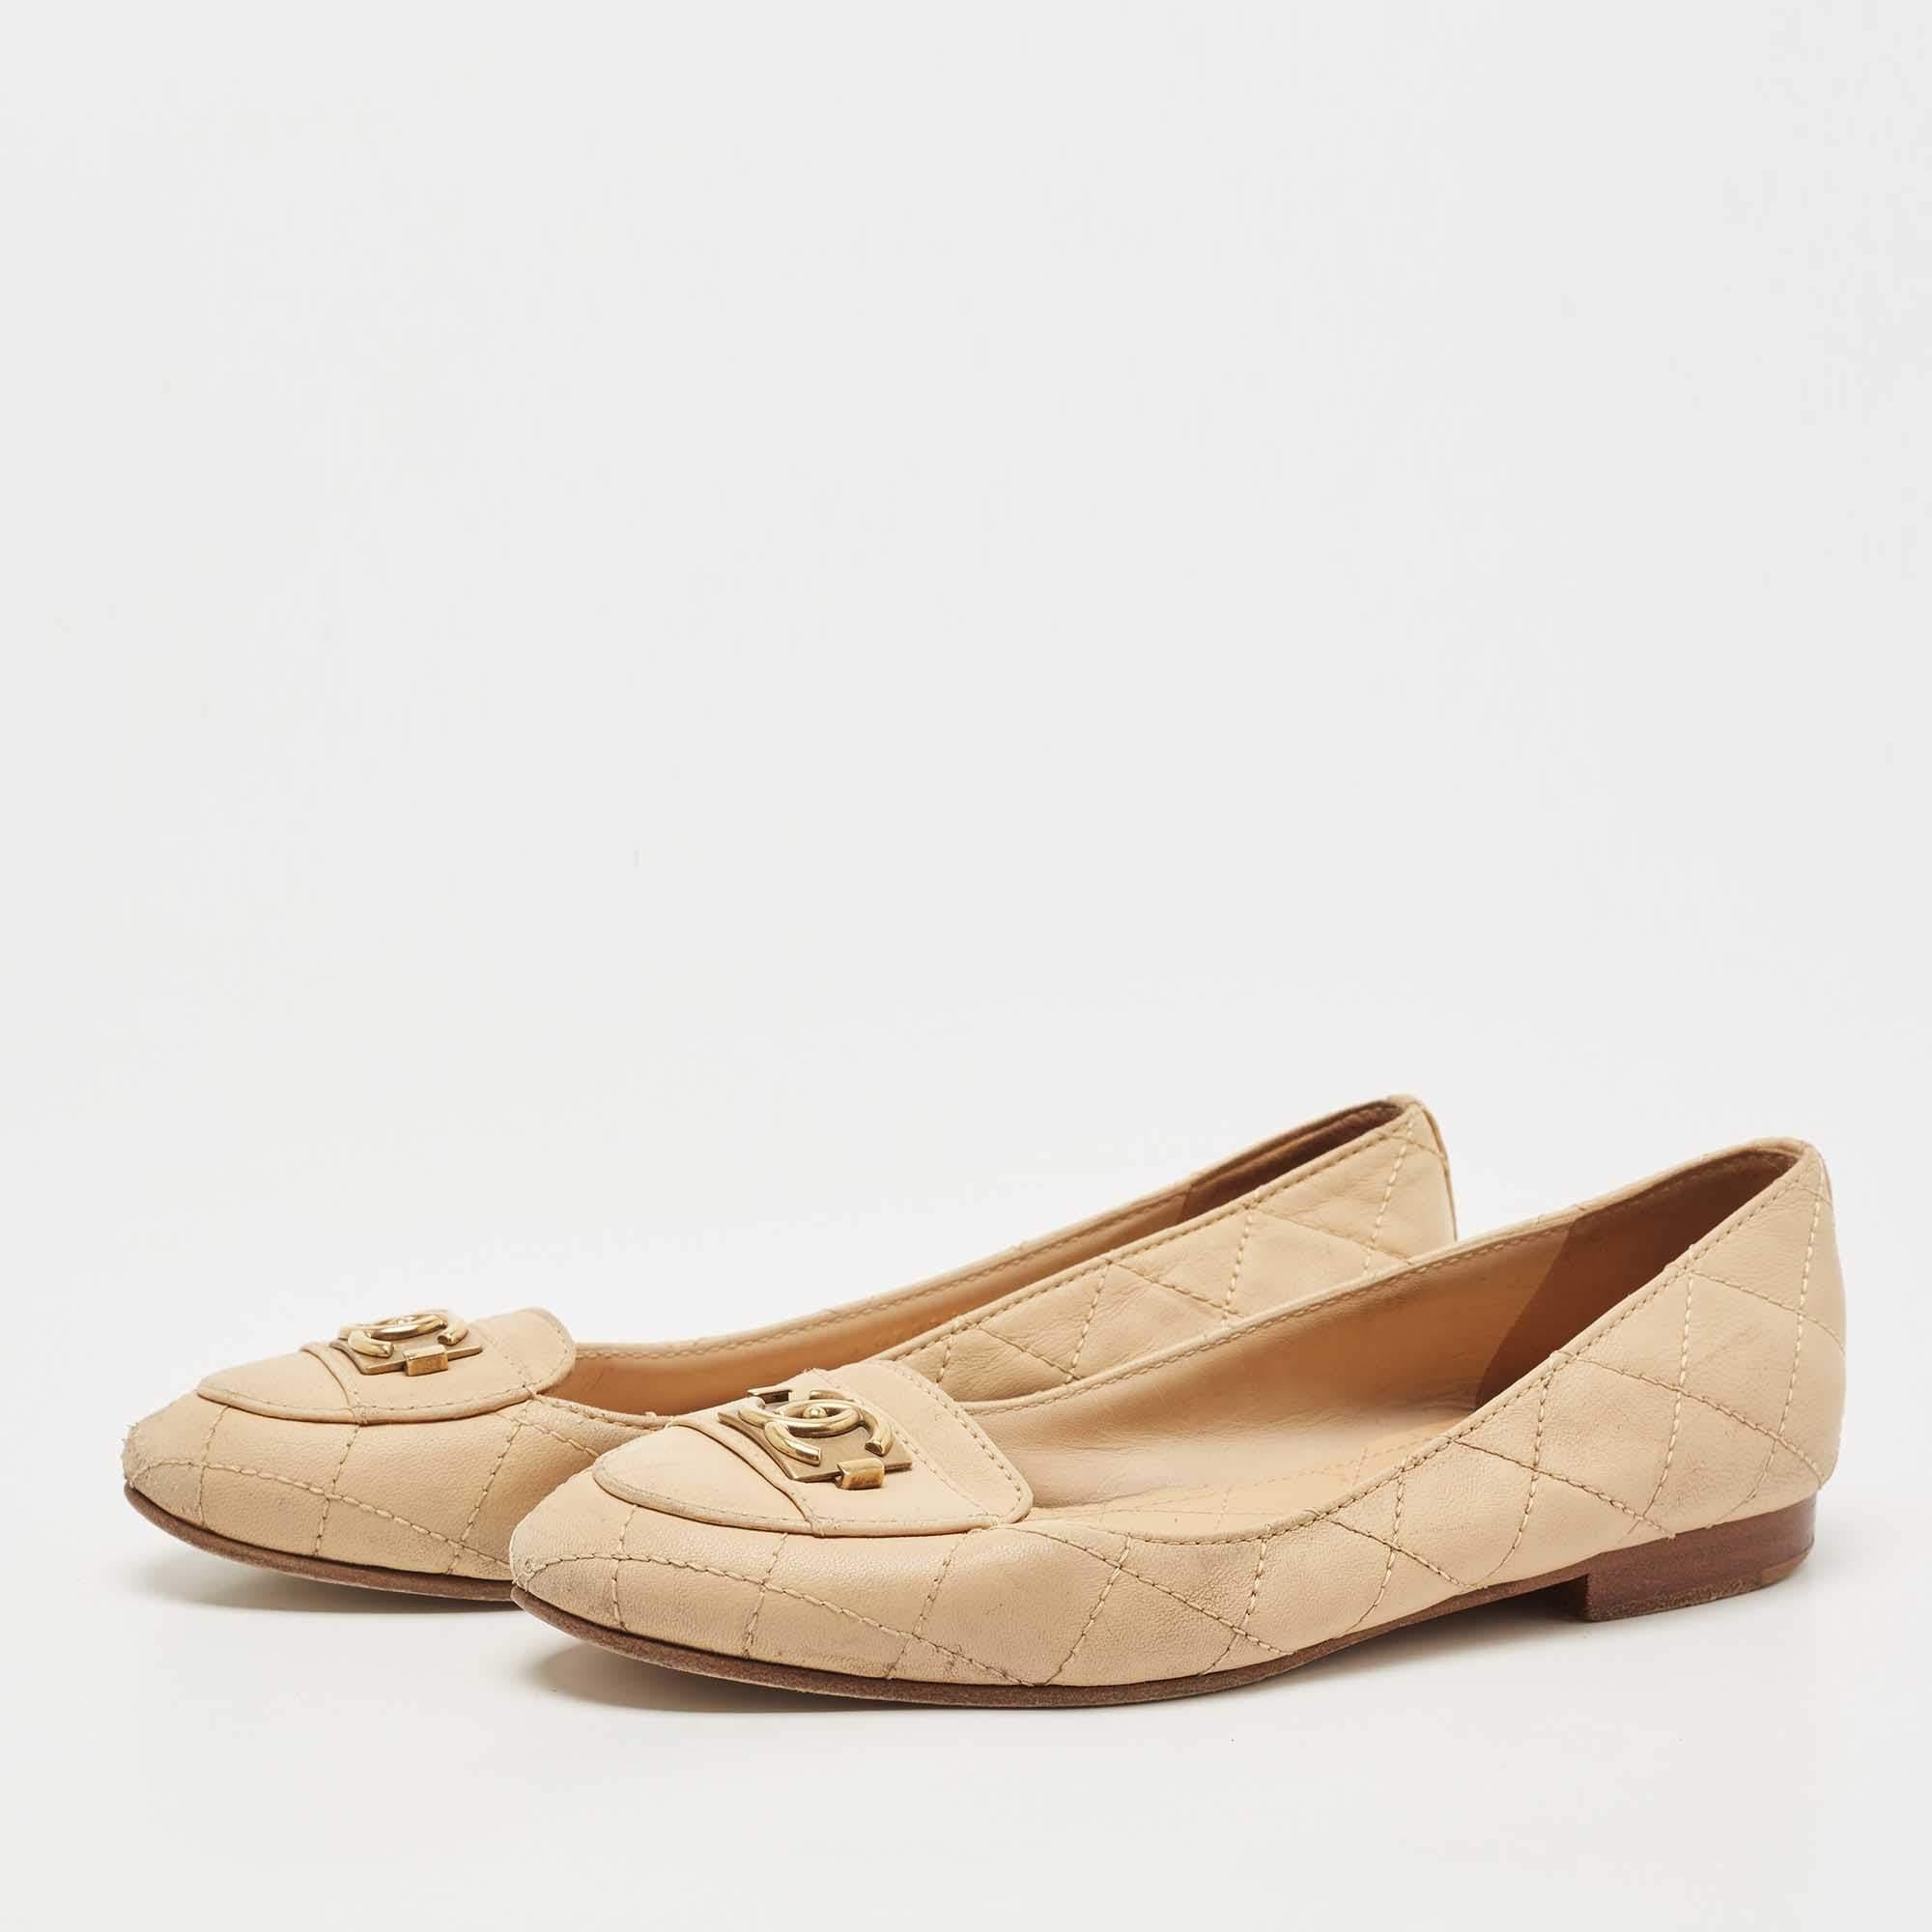 Complete your look by adding these Chanel leather ballet flats to your lovely wardrobe. They are crafted skilfully to grant the perfect fit and style.

